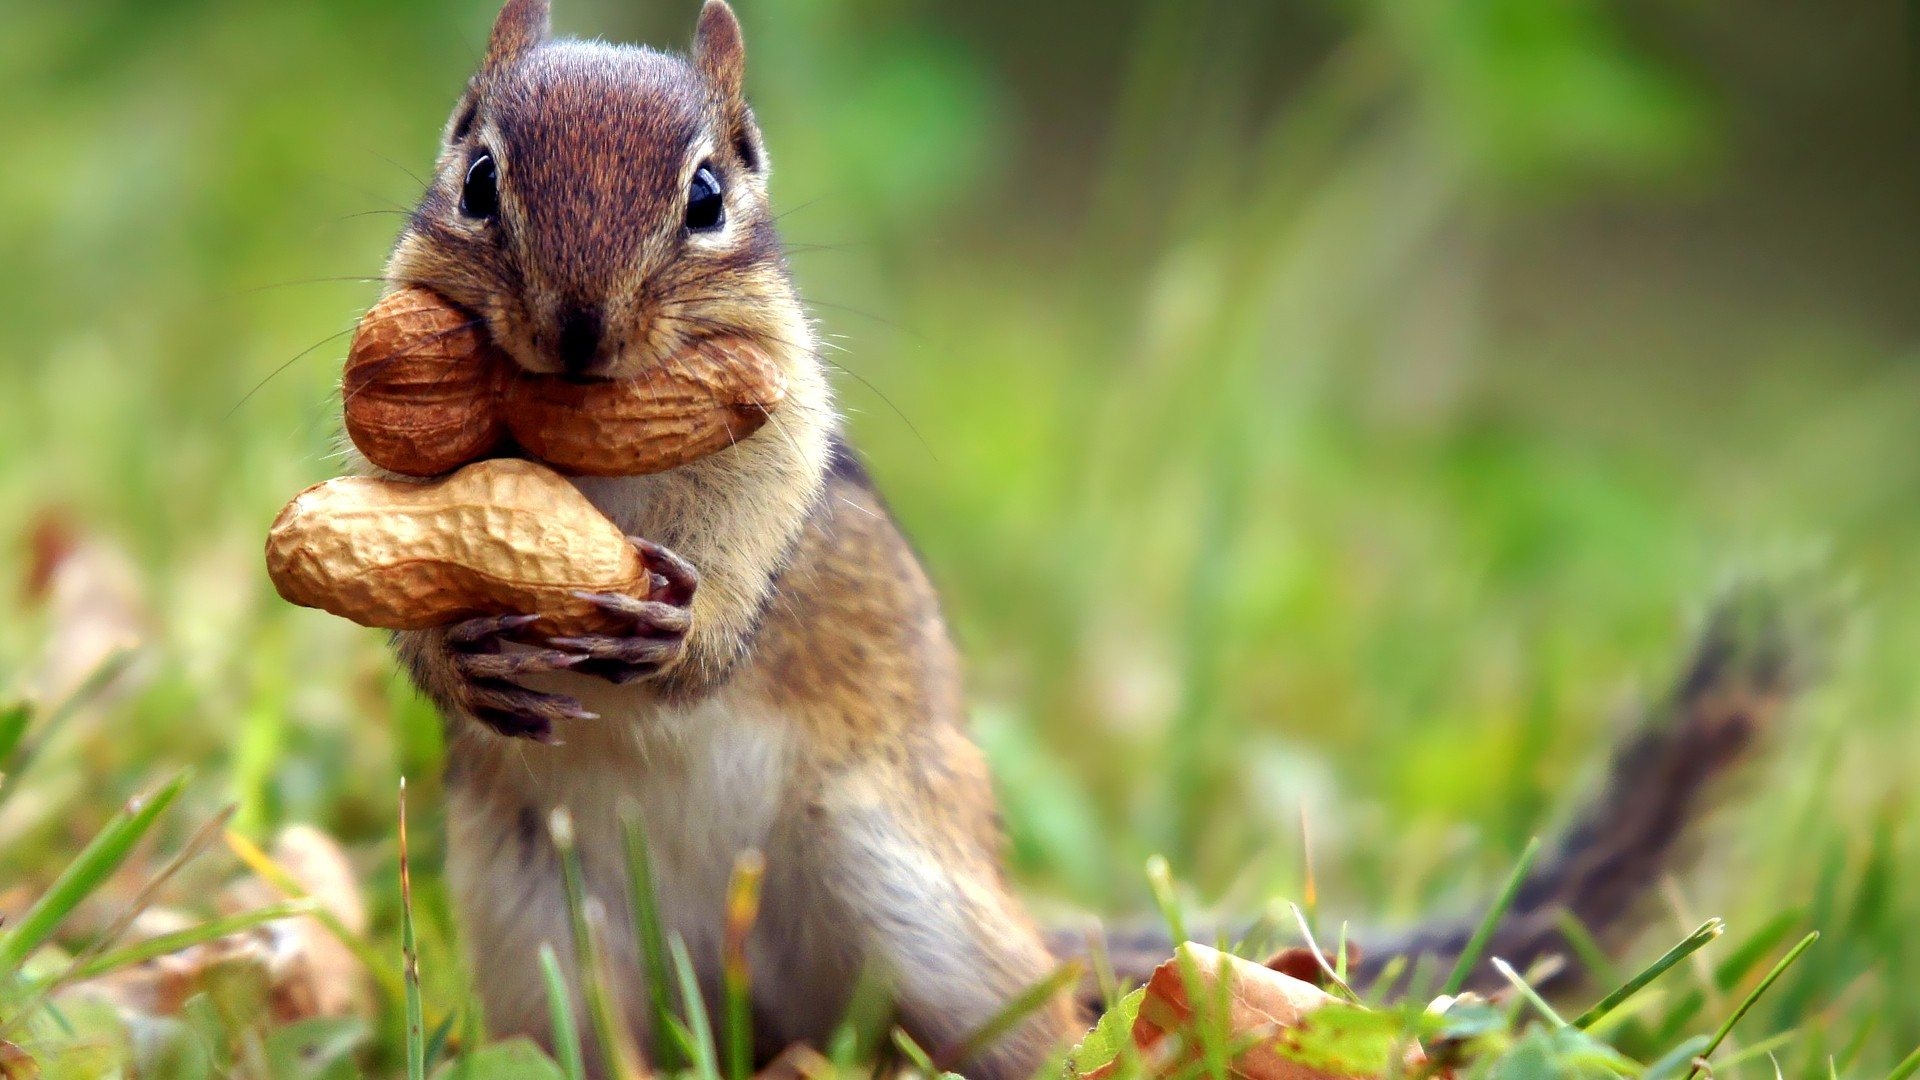 Find out: Squirrel Eating Peanuts wallpaper on http://hdpicorner.com ...